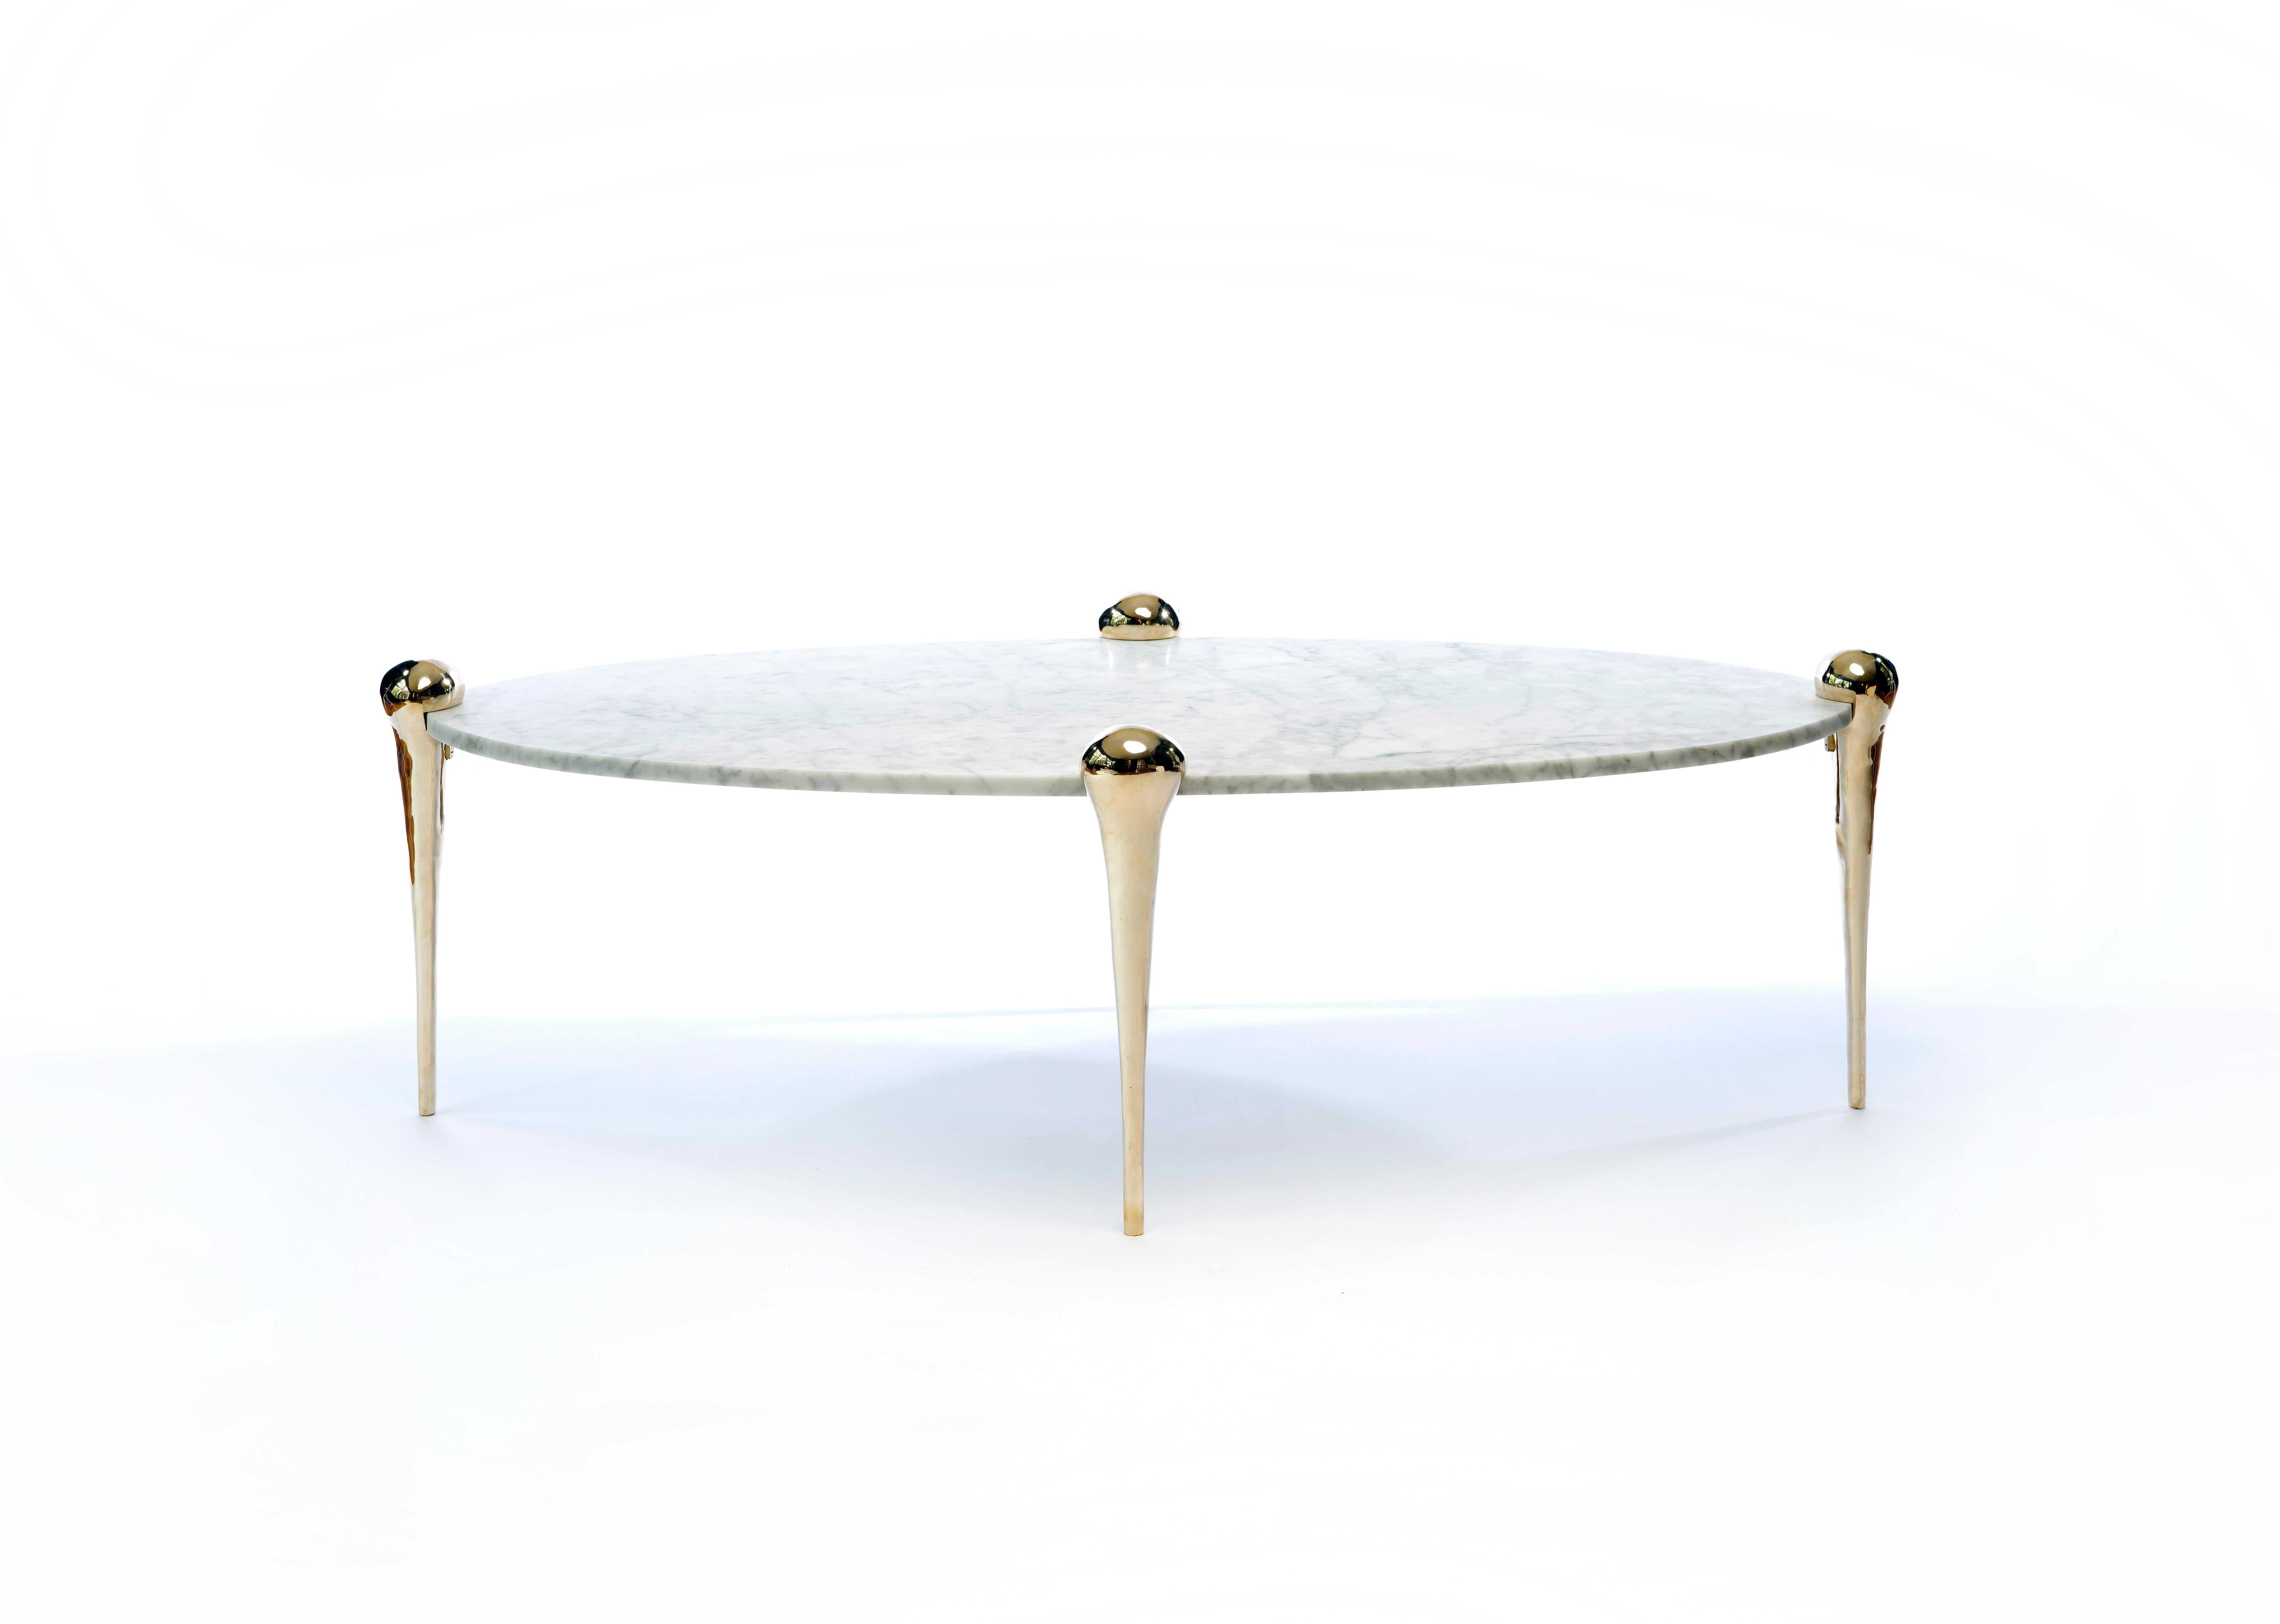 Statuary Marble Petra coffee table by Konekt Furniture 
Dimensions: 57.5